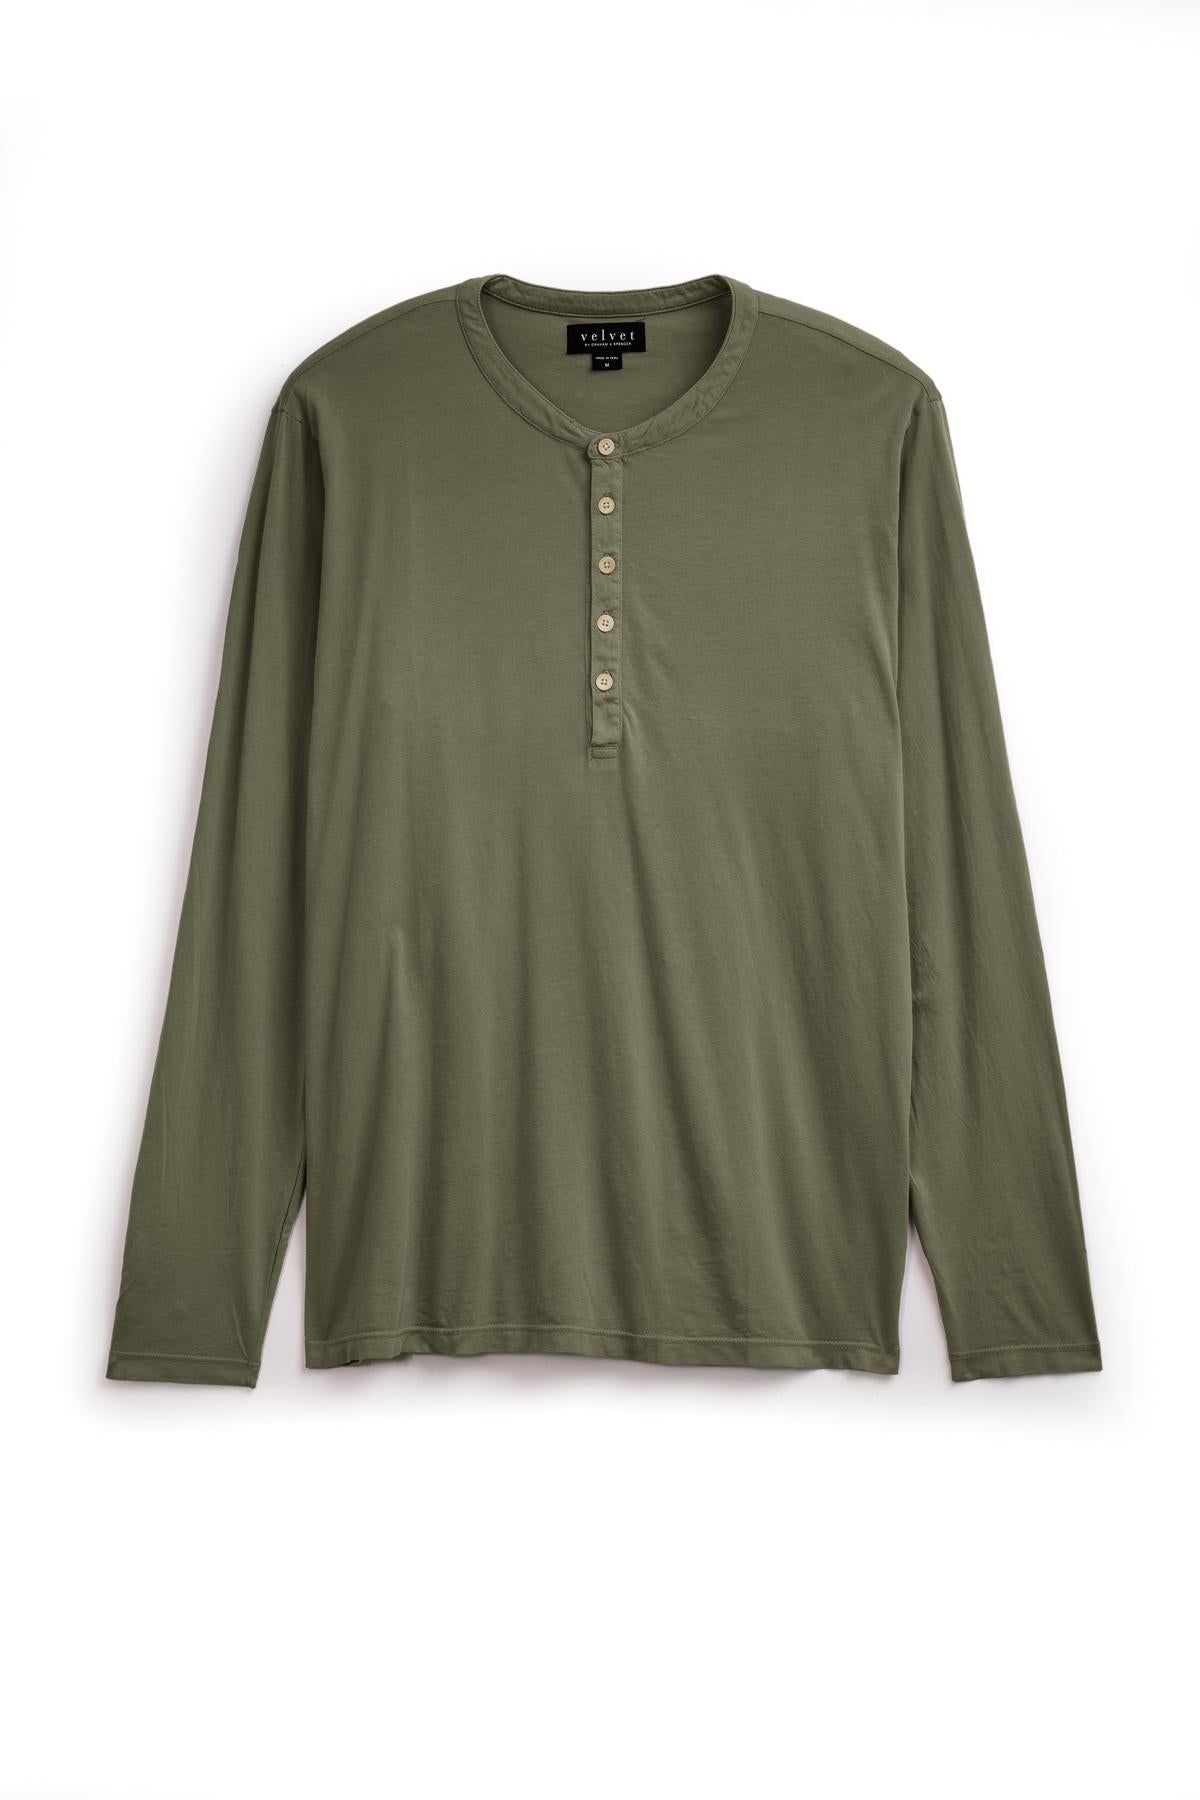 A lightweight Velvet by Graham & Spencer ALVARO COTTON JERSEY HENLEY t-shirt with buttons on the sleeve, featuring a vintage-look.-35782632833217